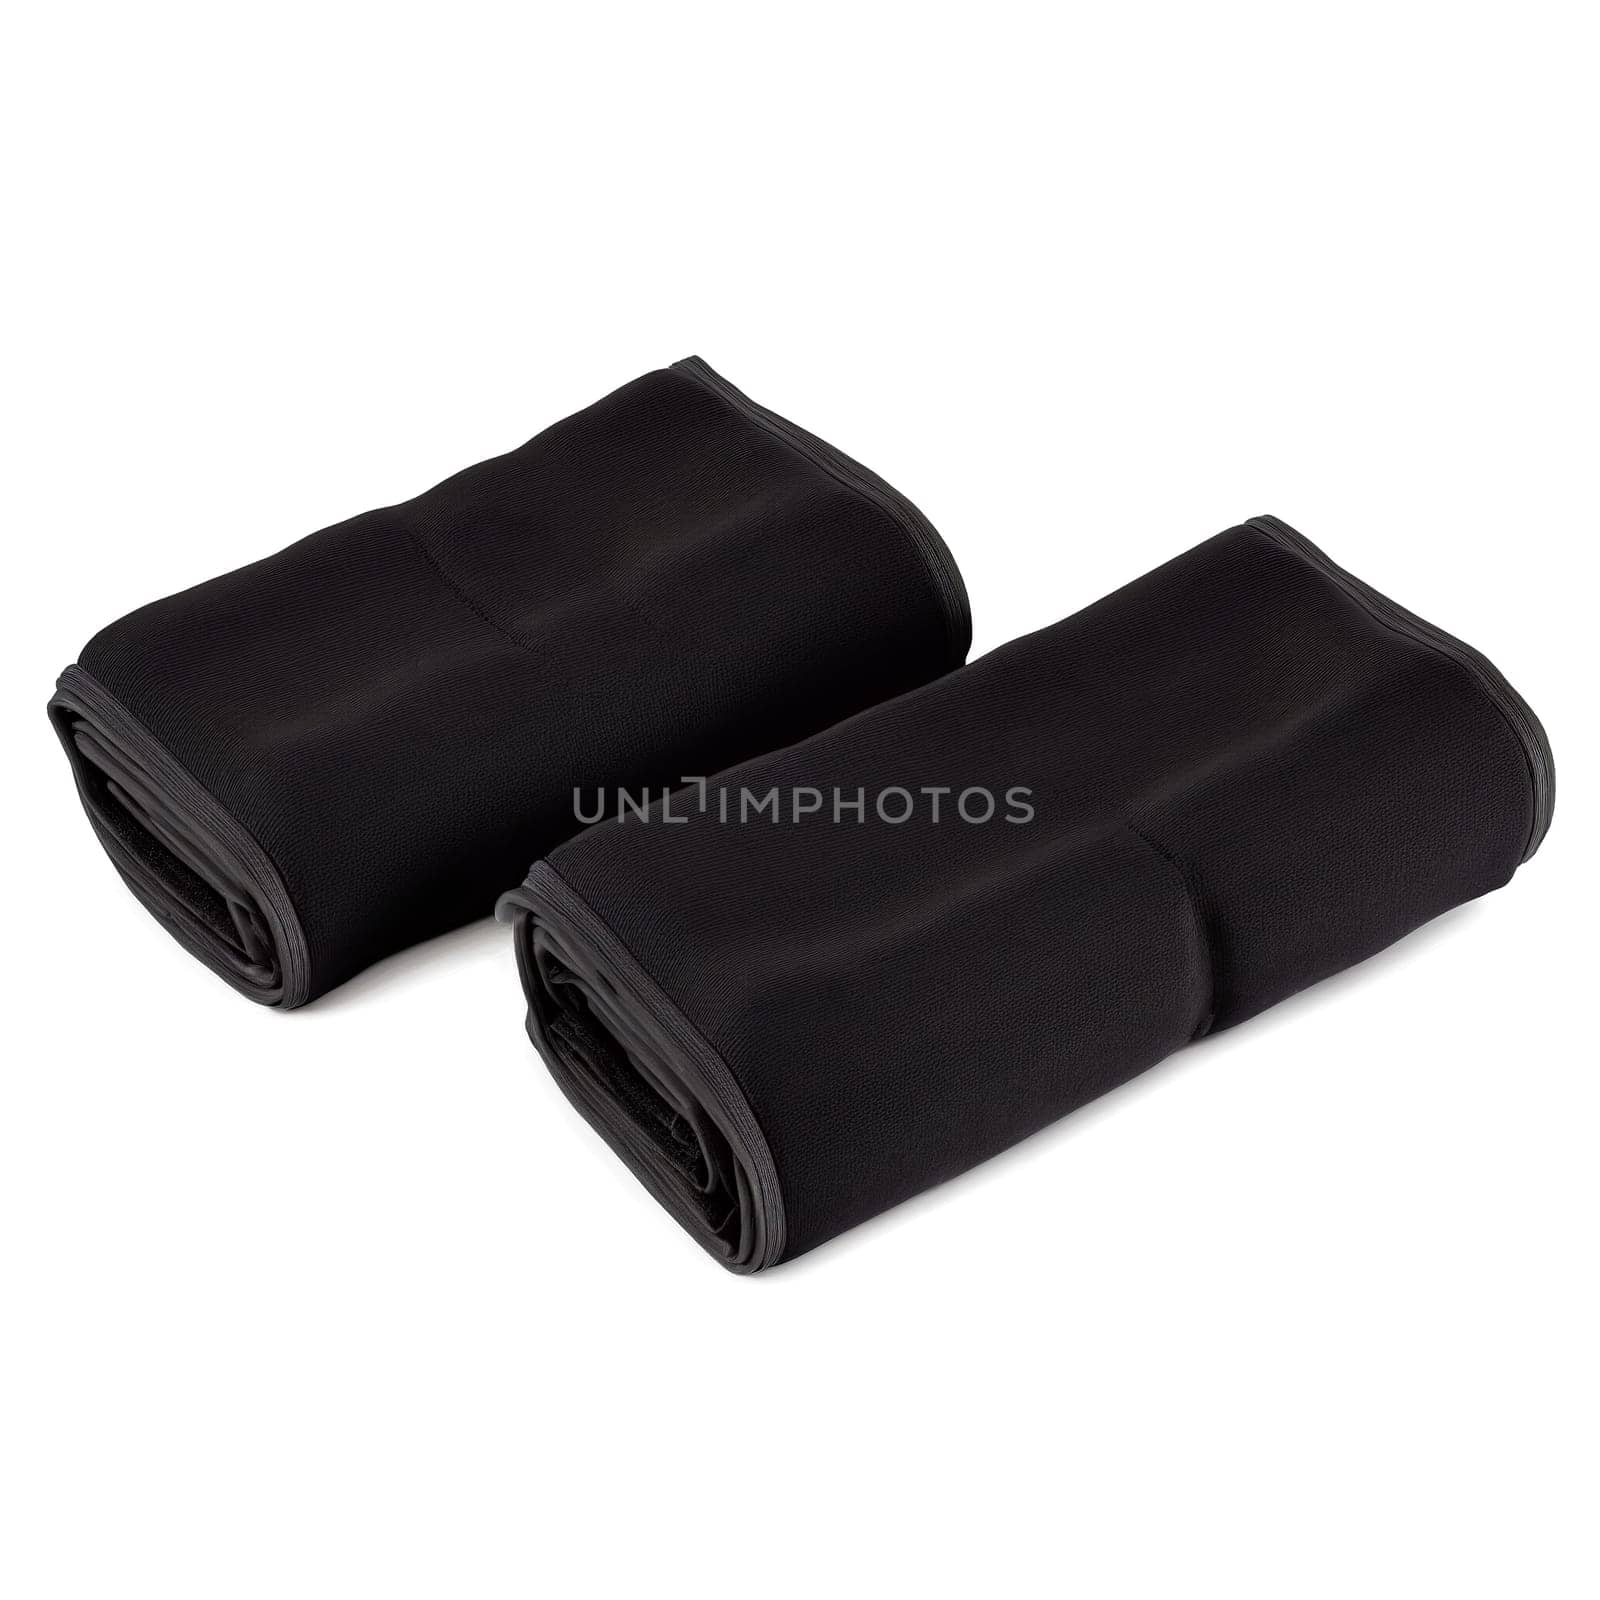 Ankle Weights pair of black neoprene ankle weights with adjustable velcro straps lying flat.